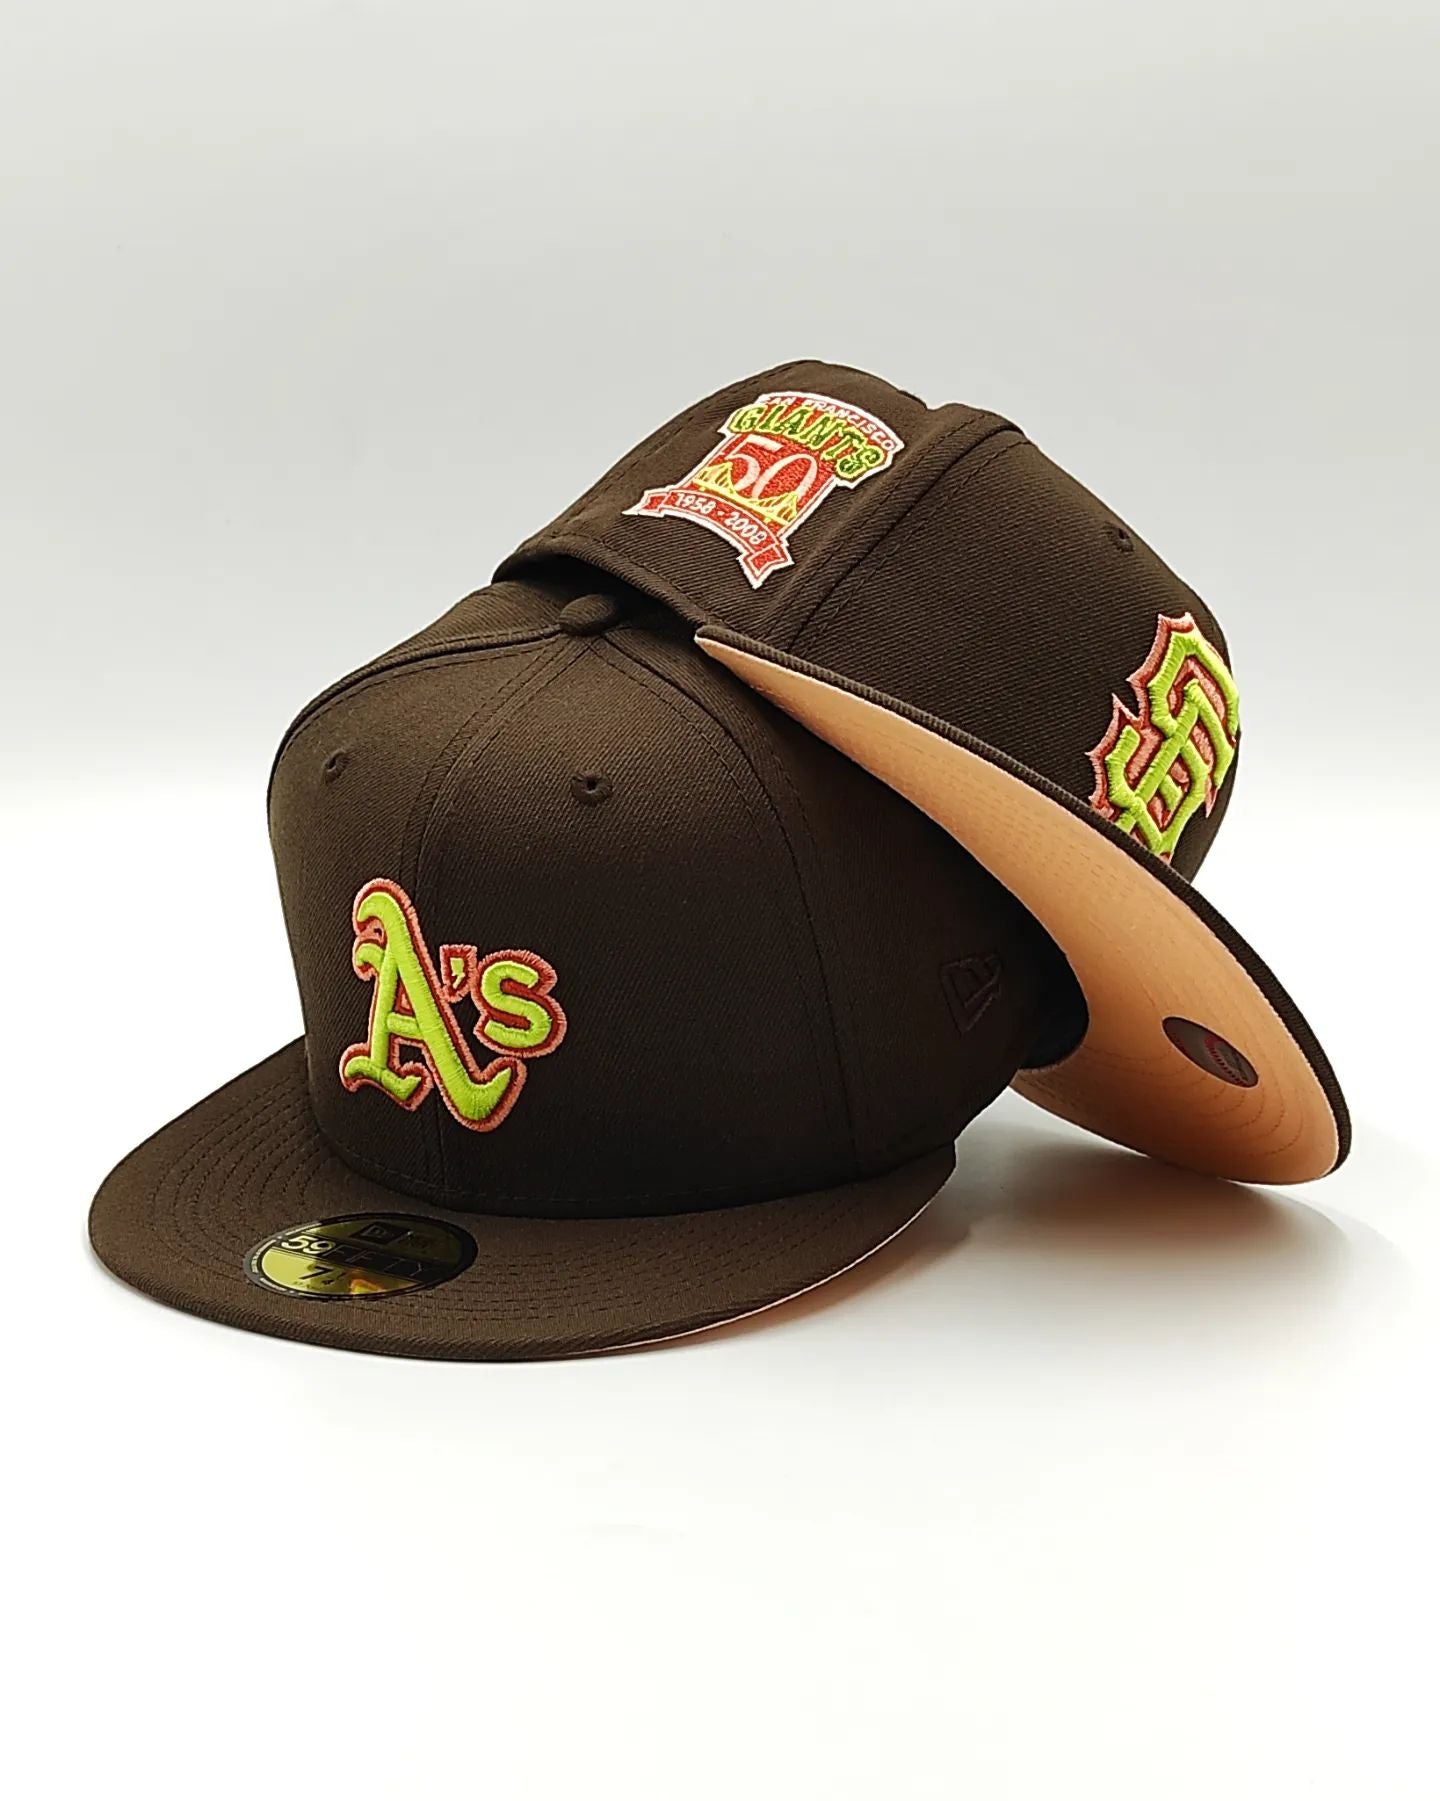 Exclusiva New Era 59Fifty Parks The Woods Oakland Athletics Battle of the Bay Patch Hat - Marron